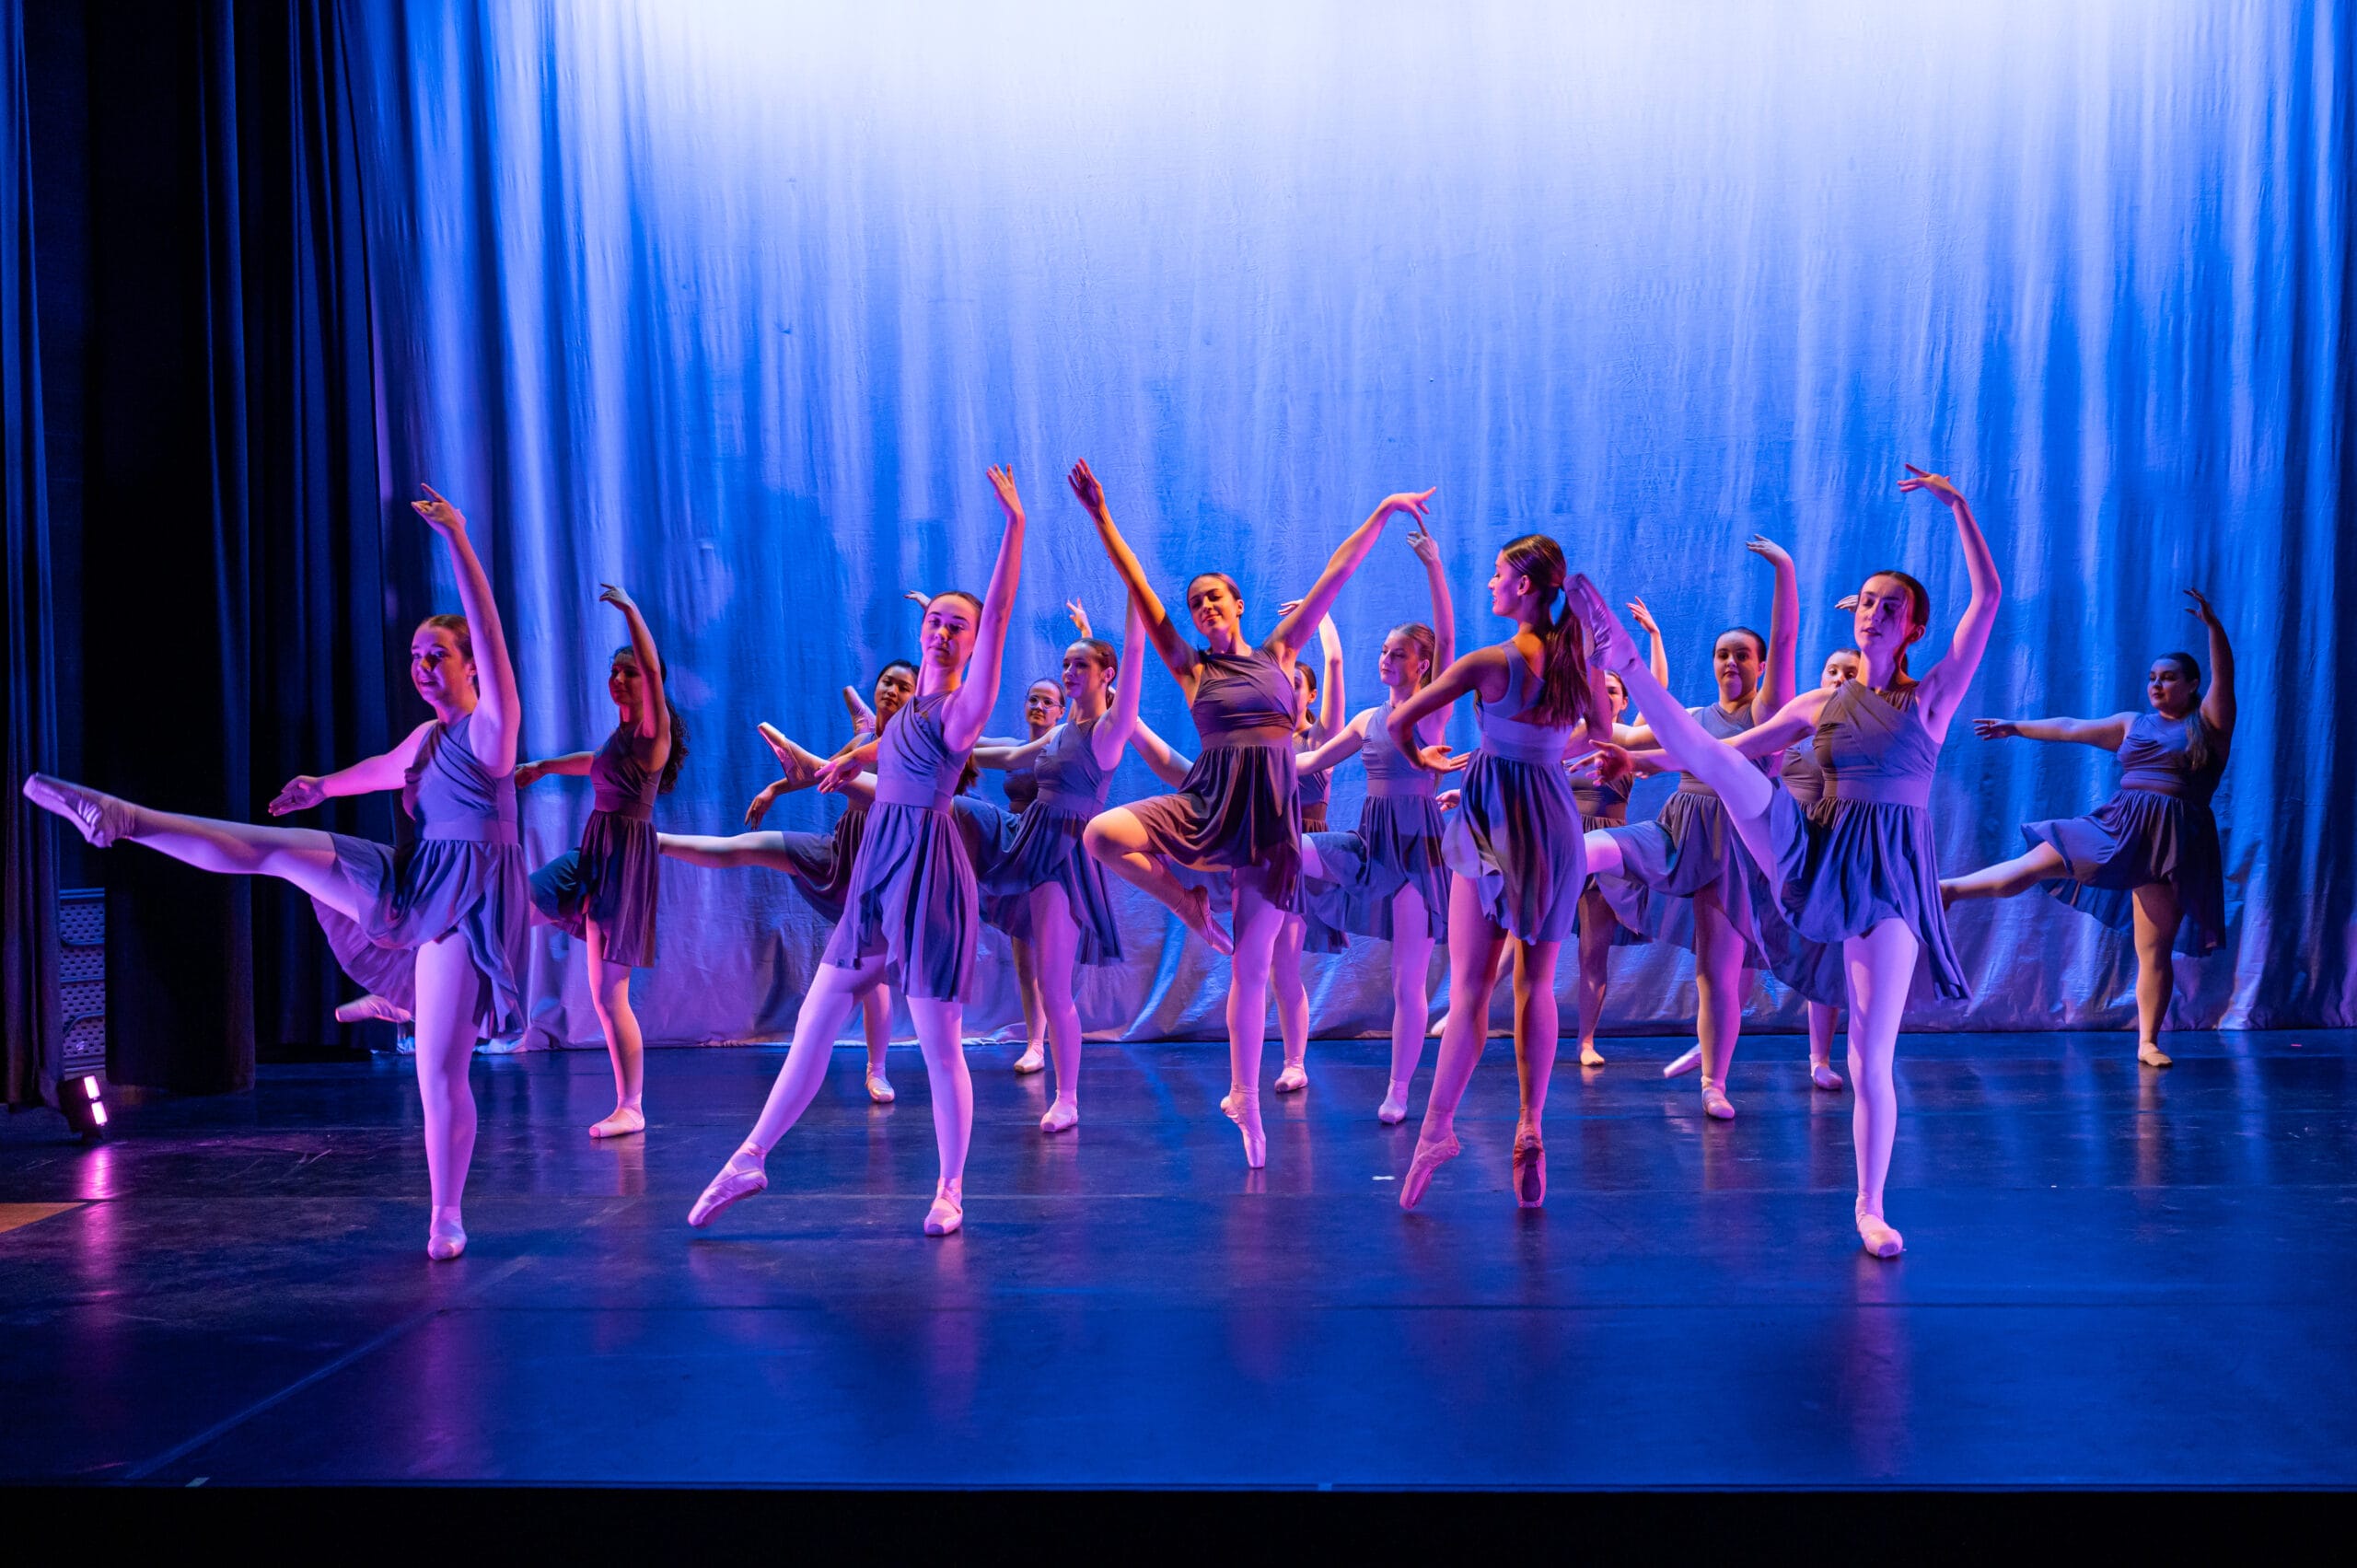 Ballet students perform on a blue-lit stage